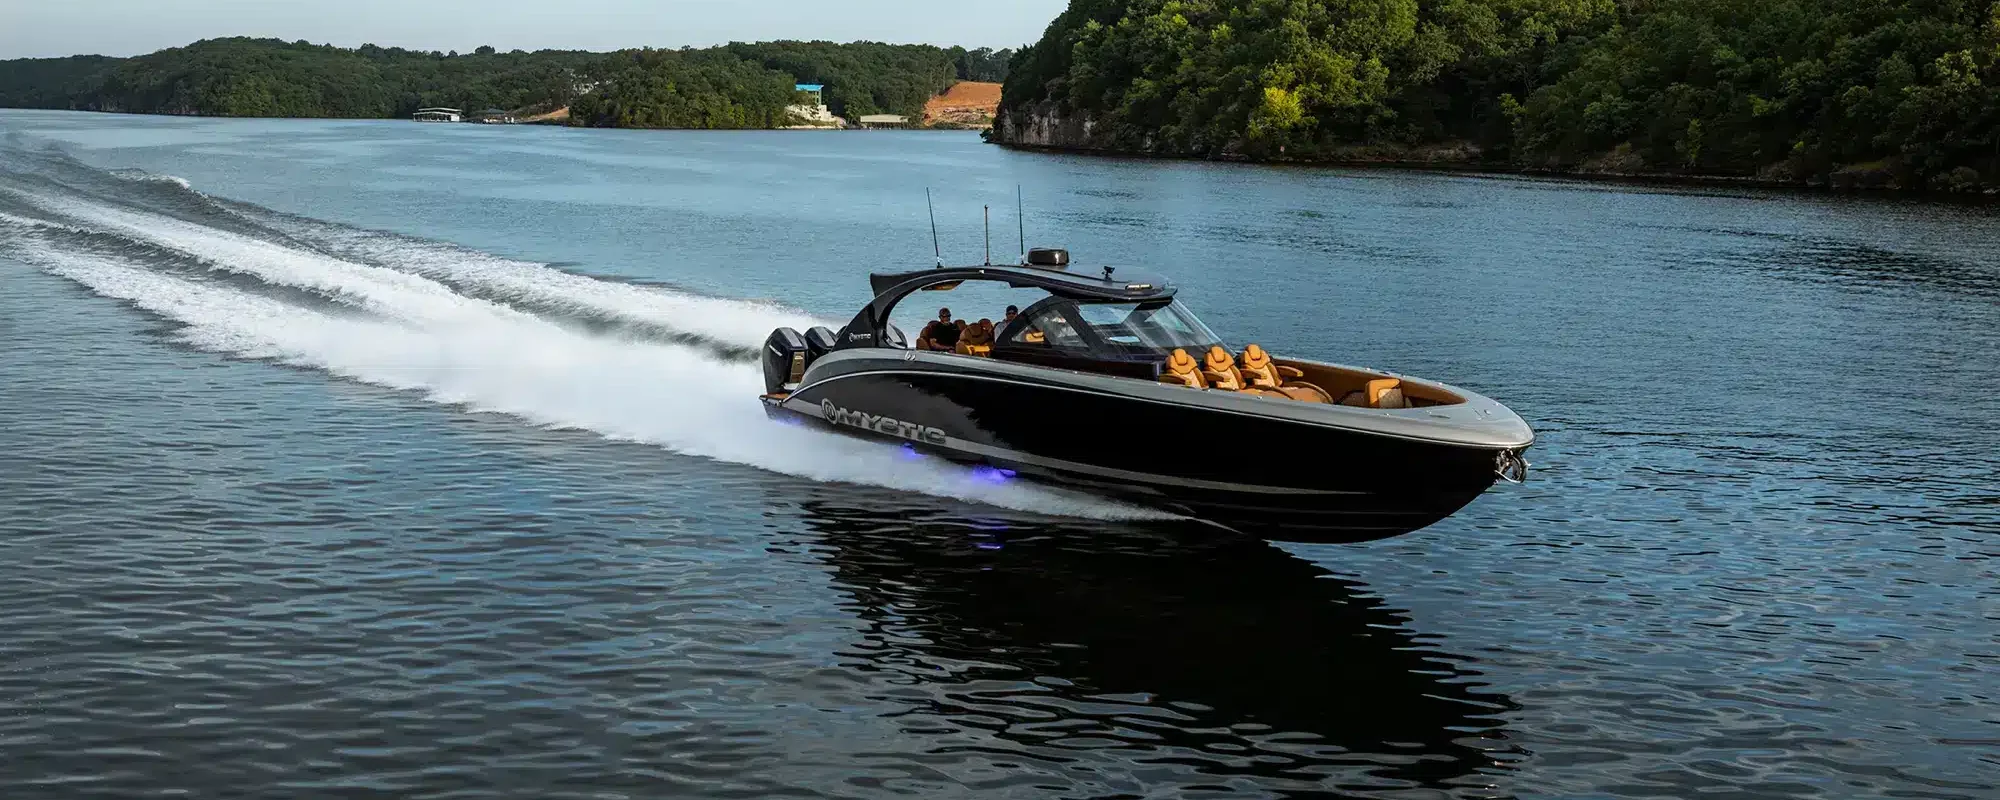 mystic powerboats loto-2022-tom-leigh-1152